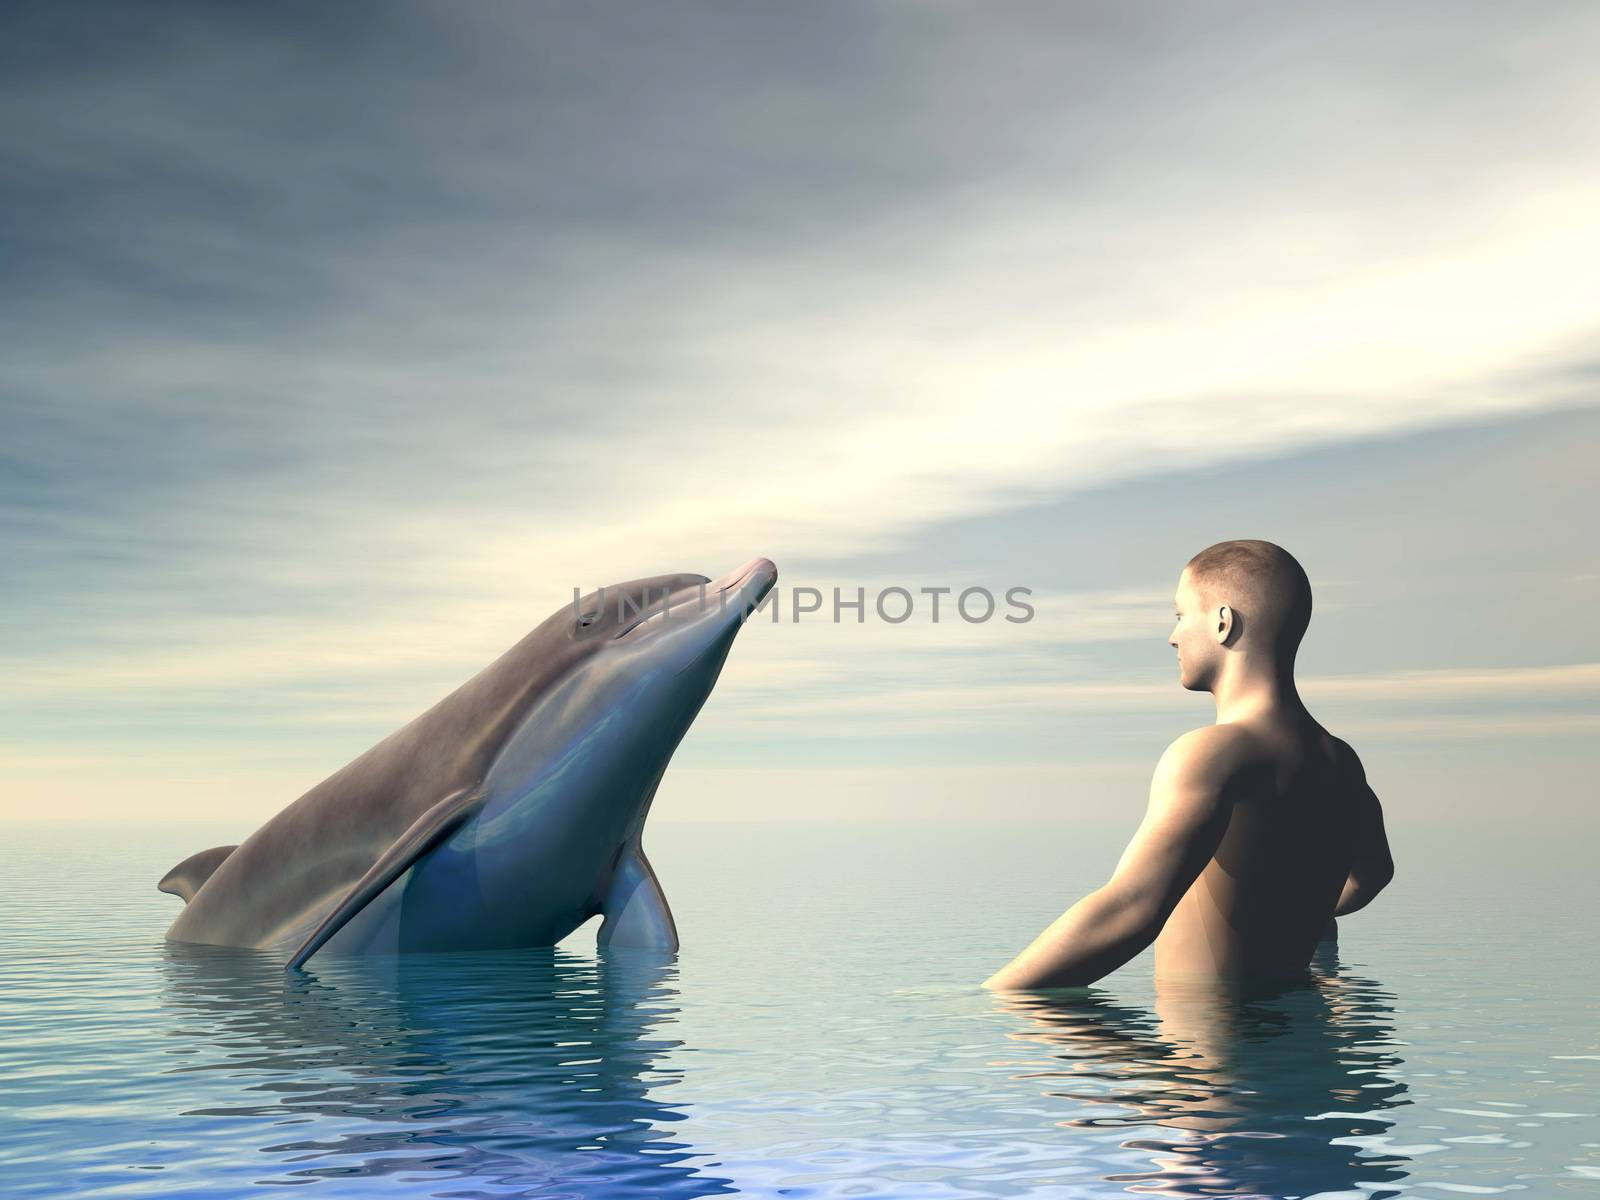 Man in front of a dolphin into the ocean by cloudy weather